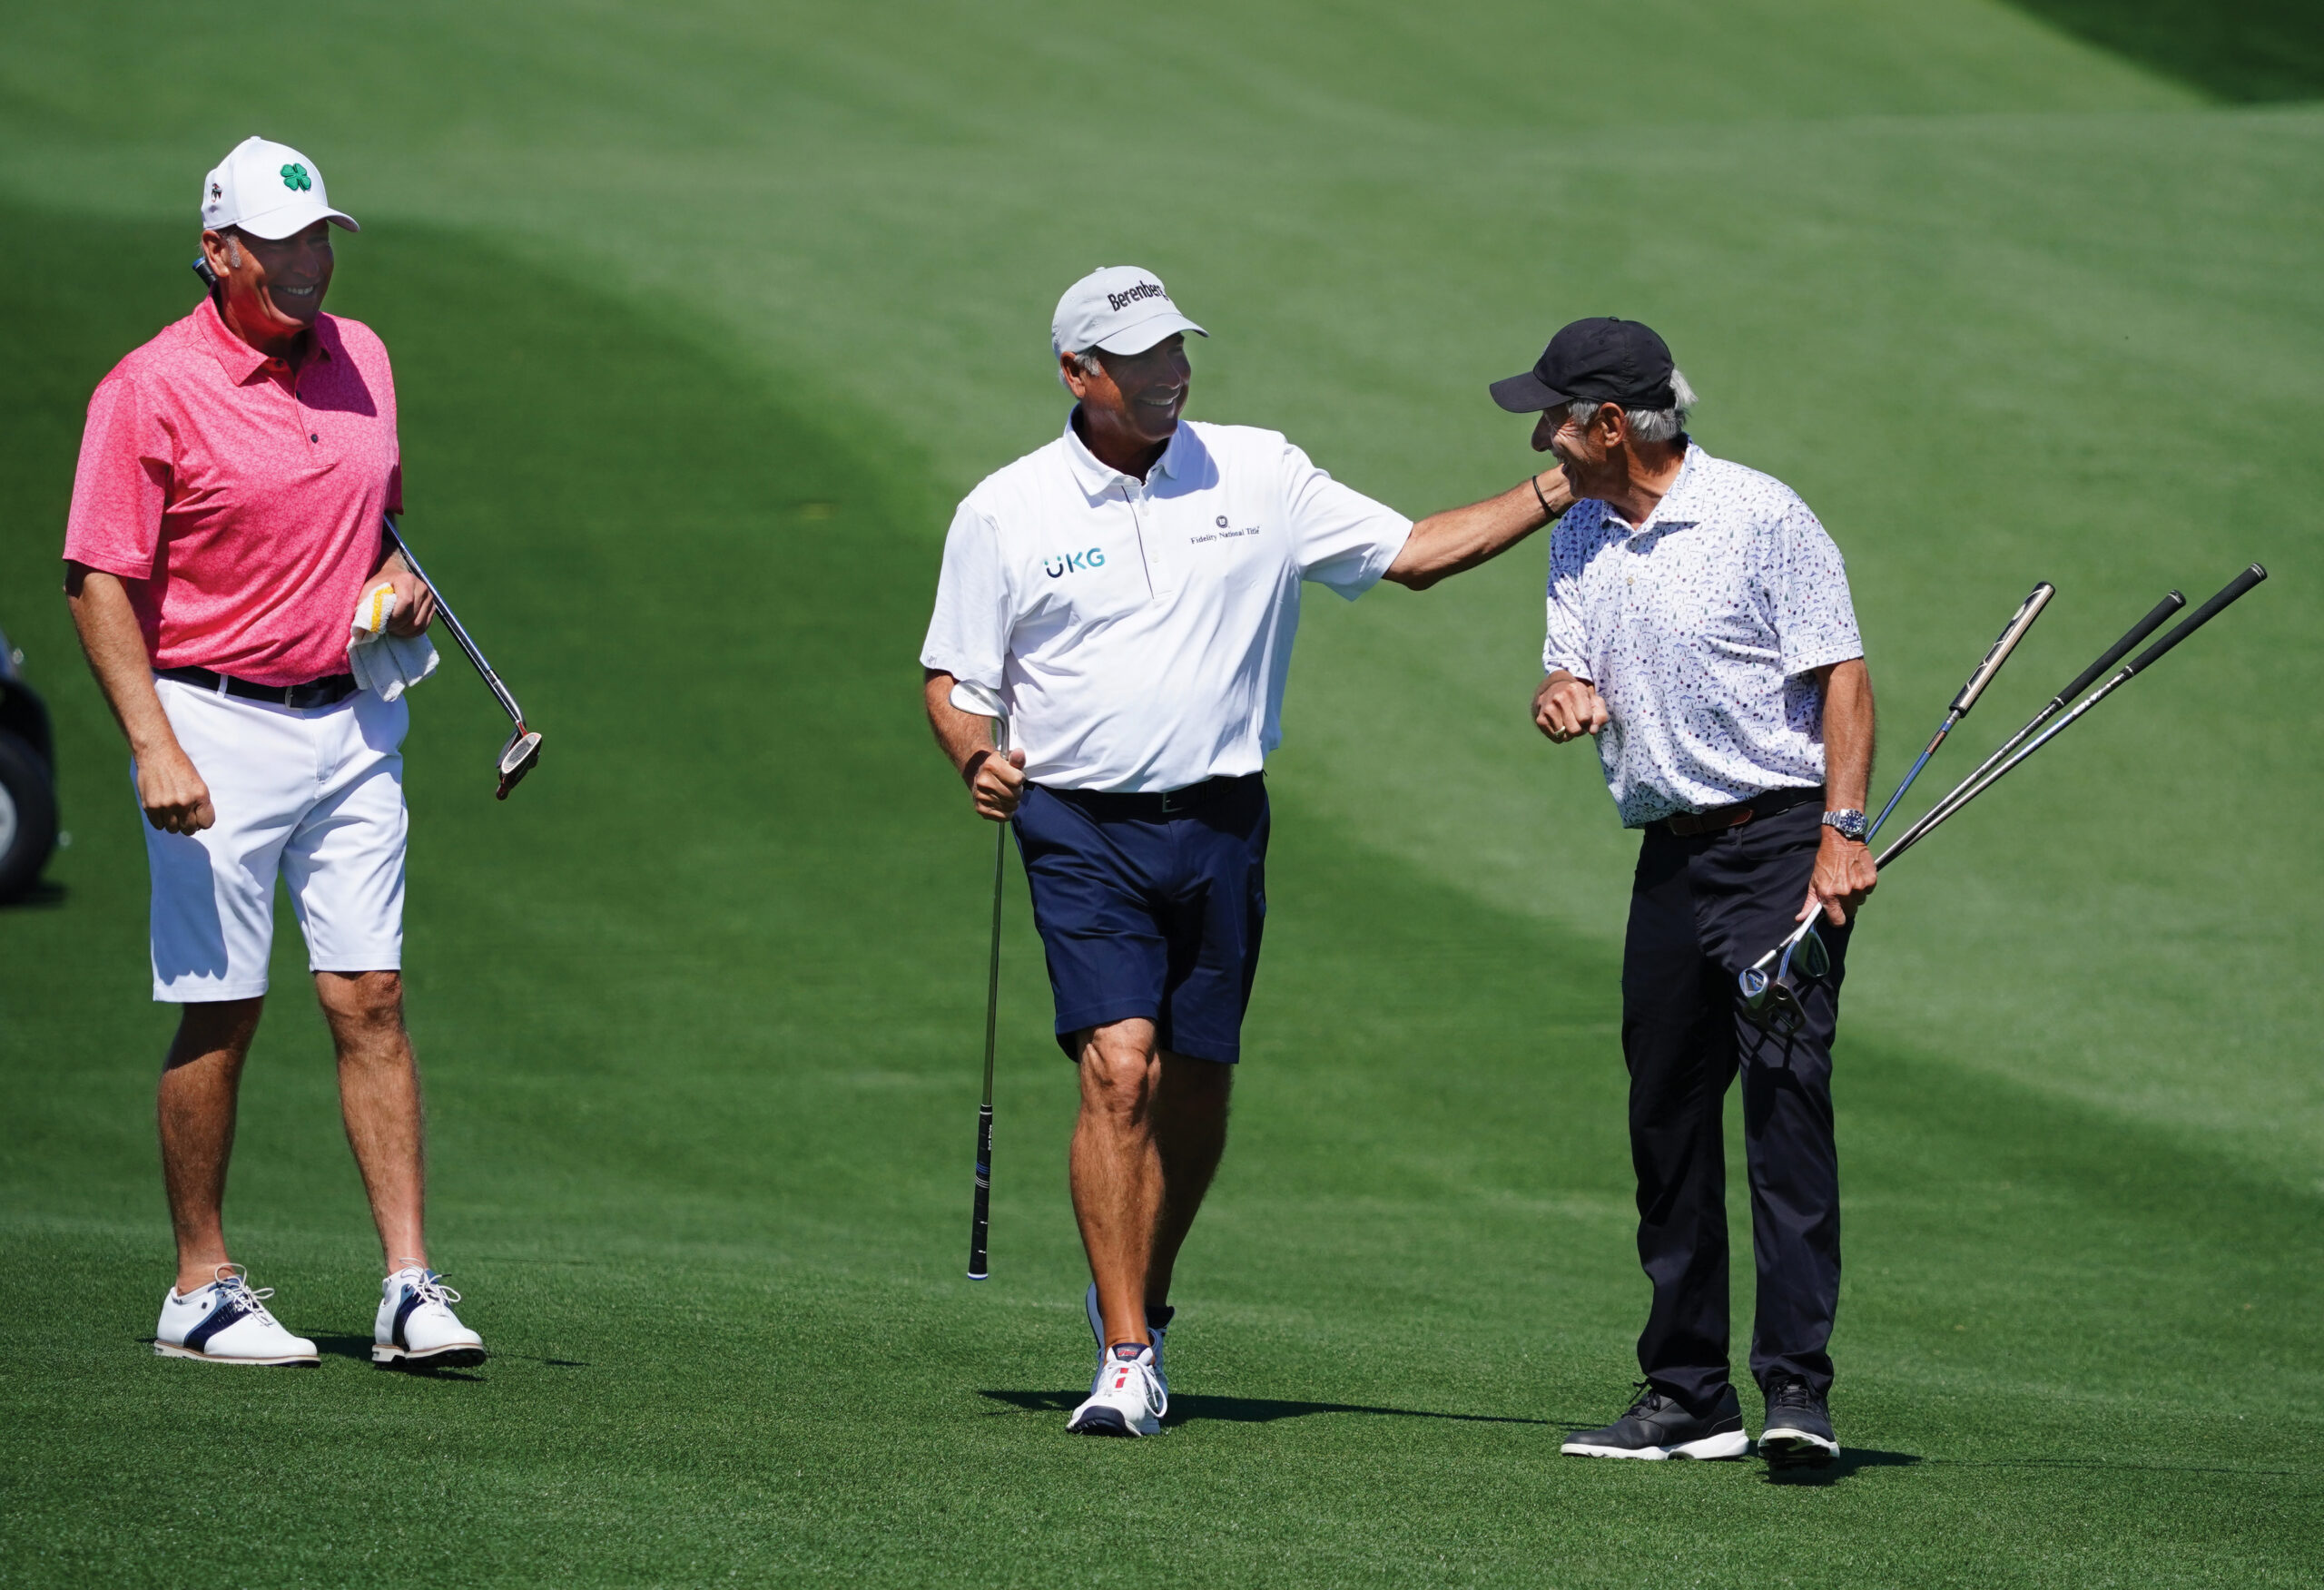 Tee-up with Legends at PGA Tour Champions’ Galleri Classic Pro-Am | California Golf + Travel